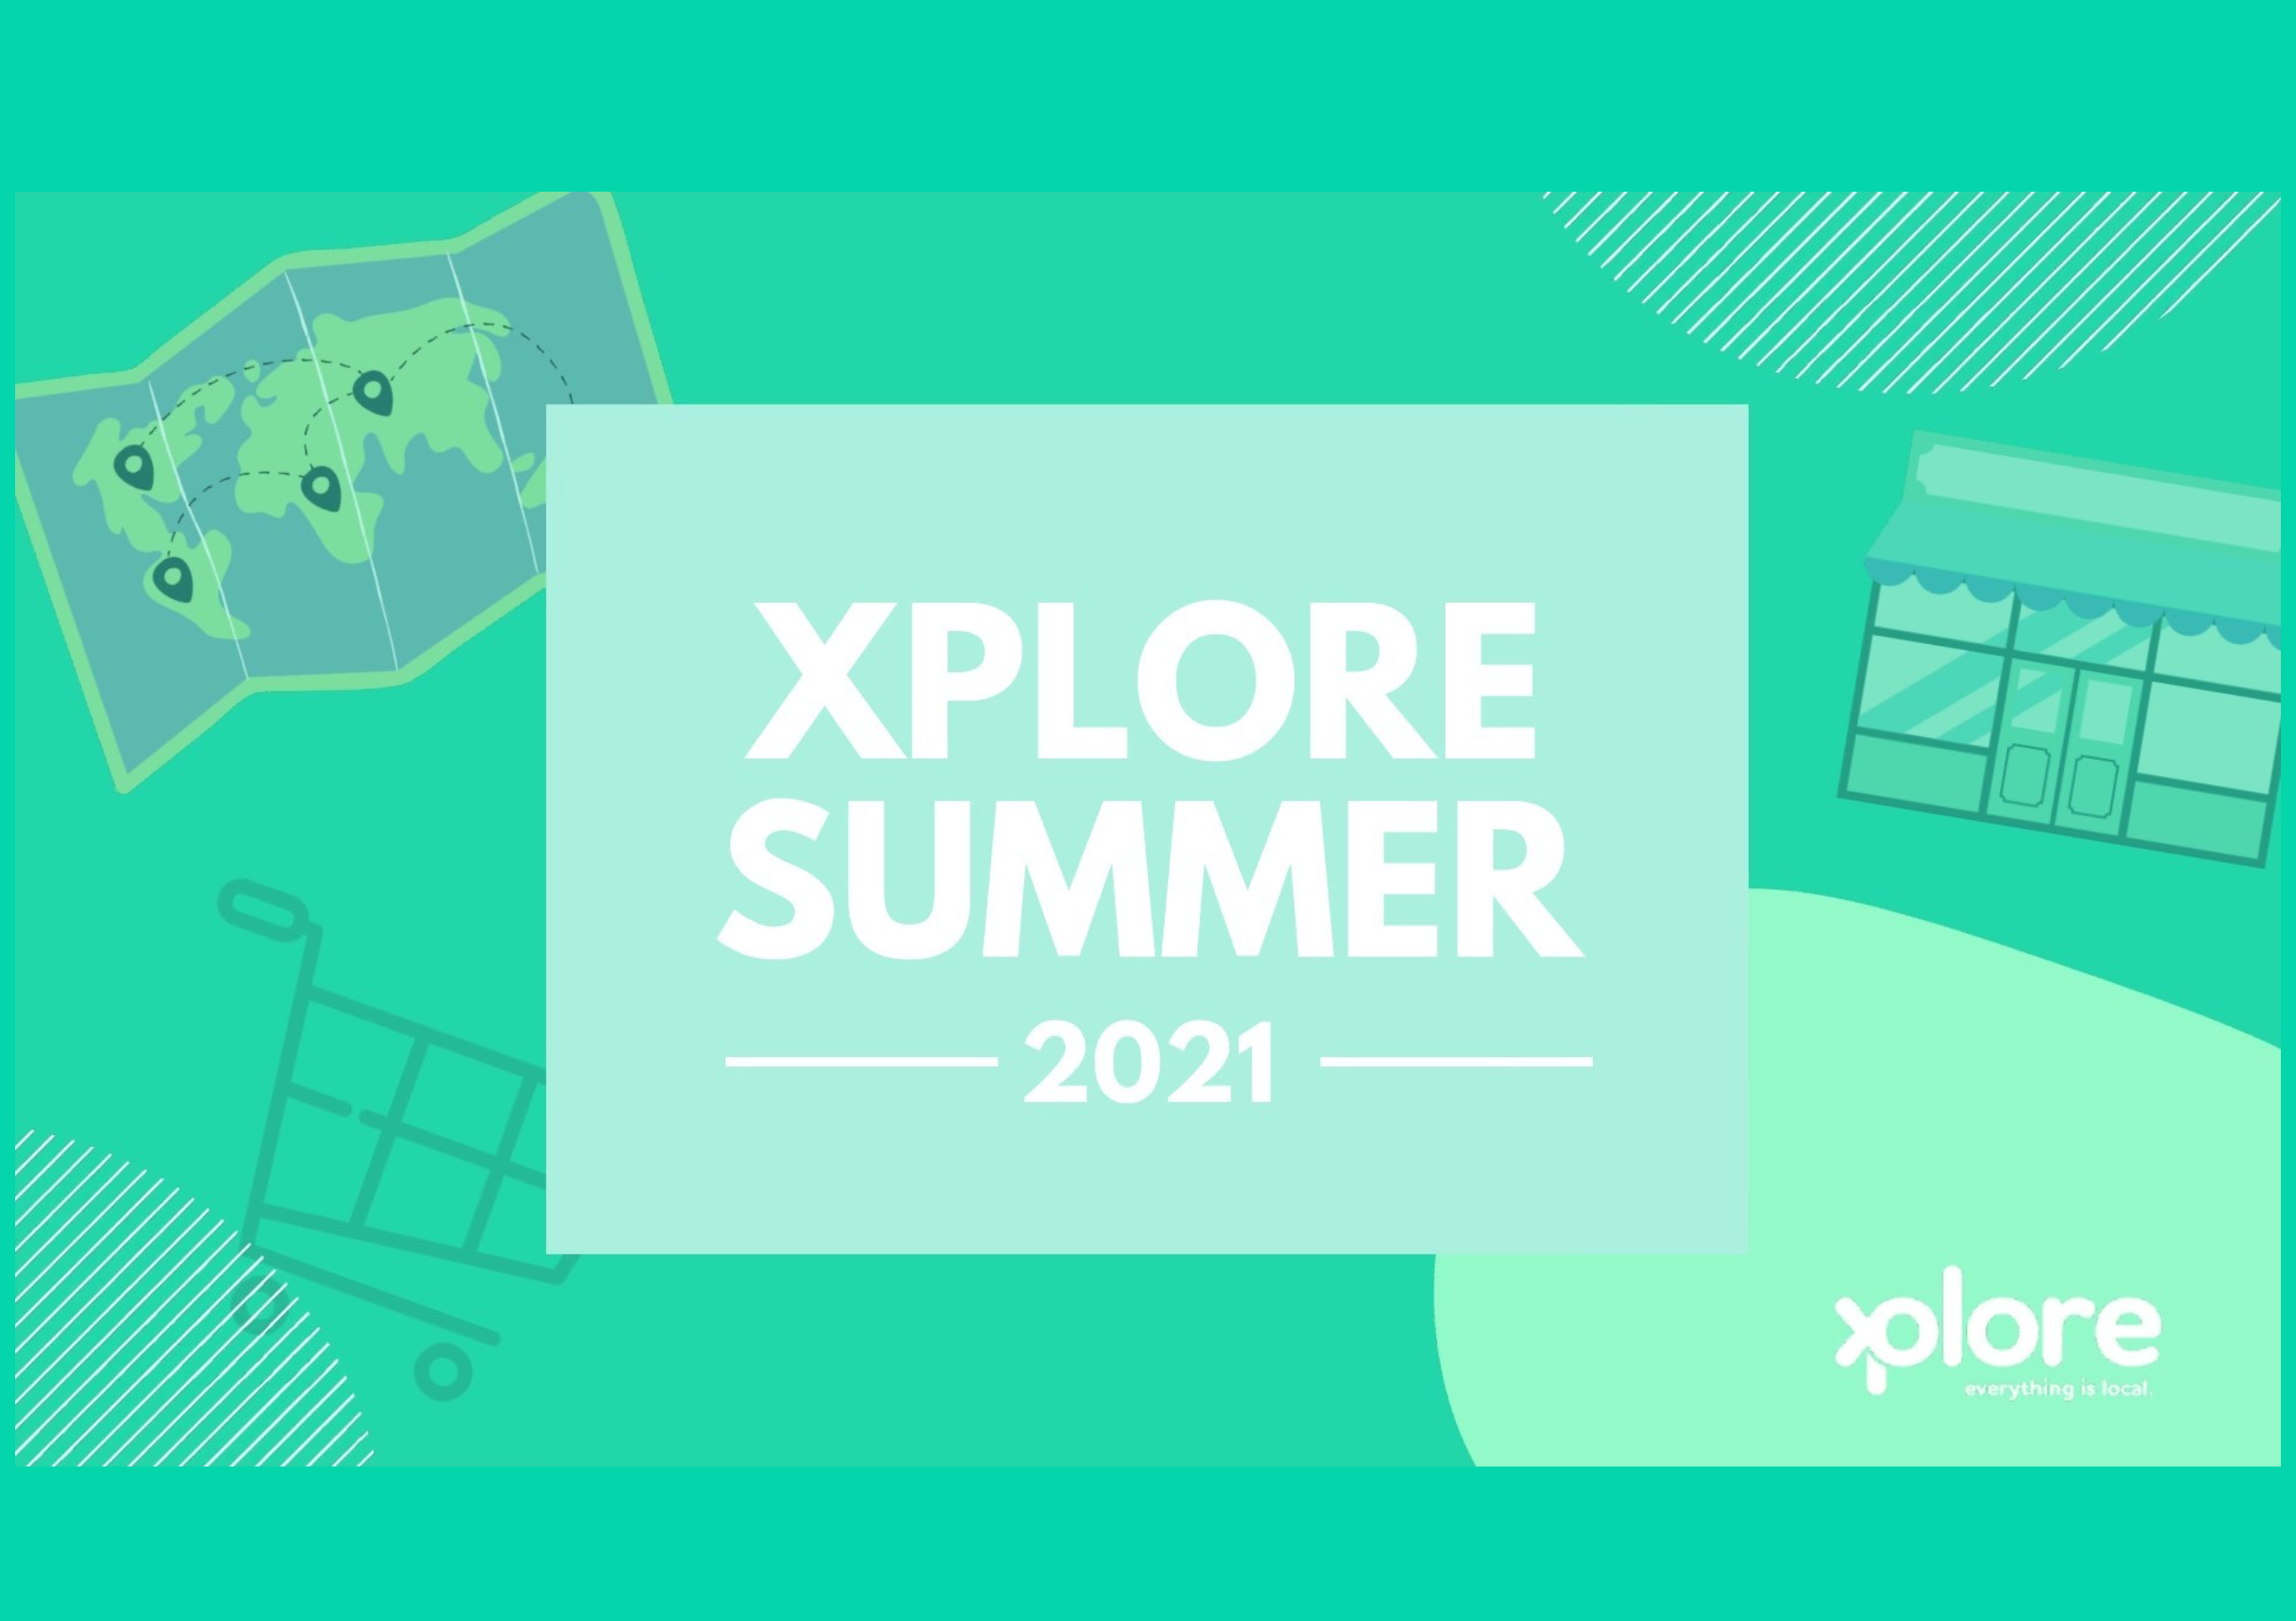 The Xplore Summer 2021 video - and you're in it!